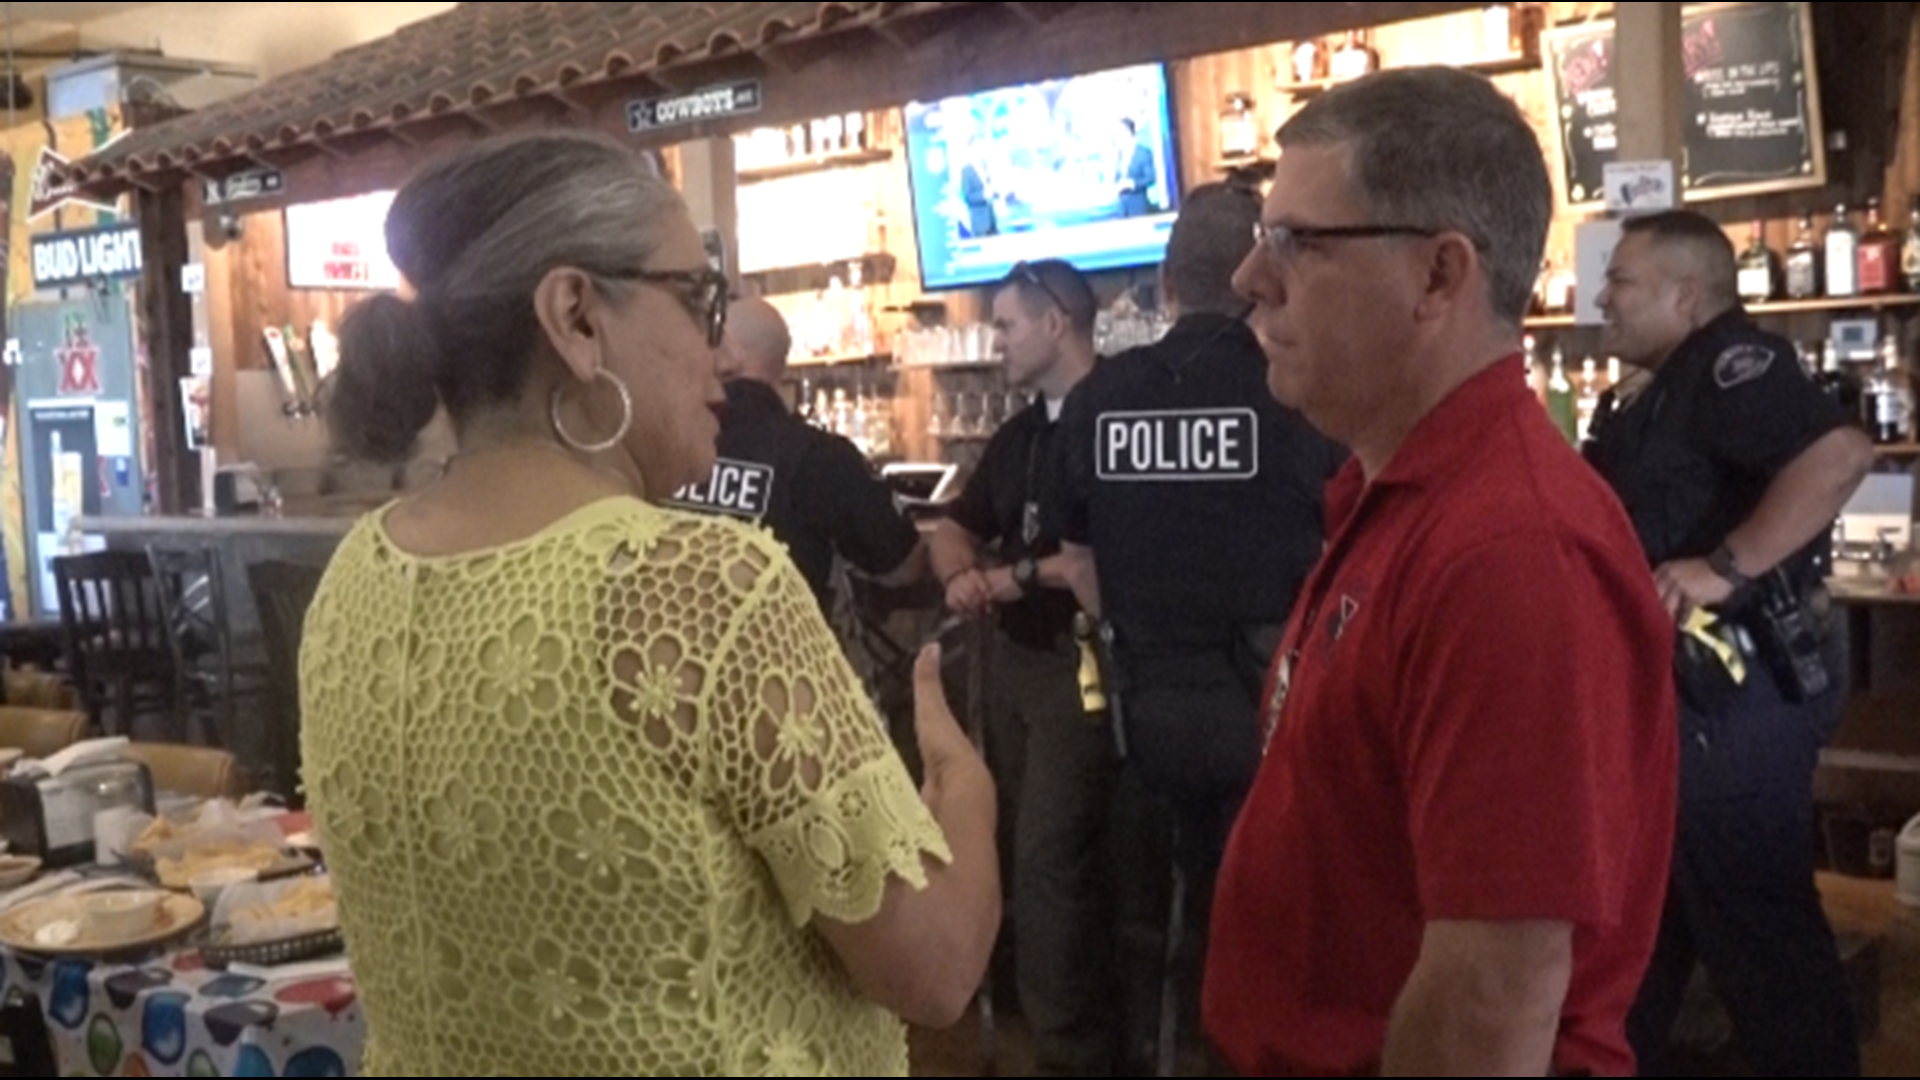 TPD partnered with District 17 LULAC representatives to discuss the department's immigration policies and address concerns from the Hispanic community.